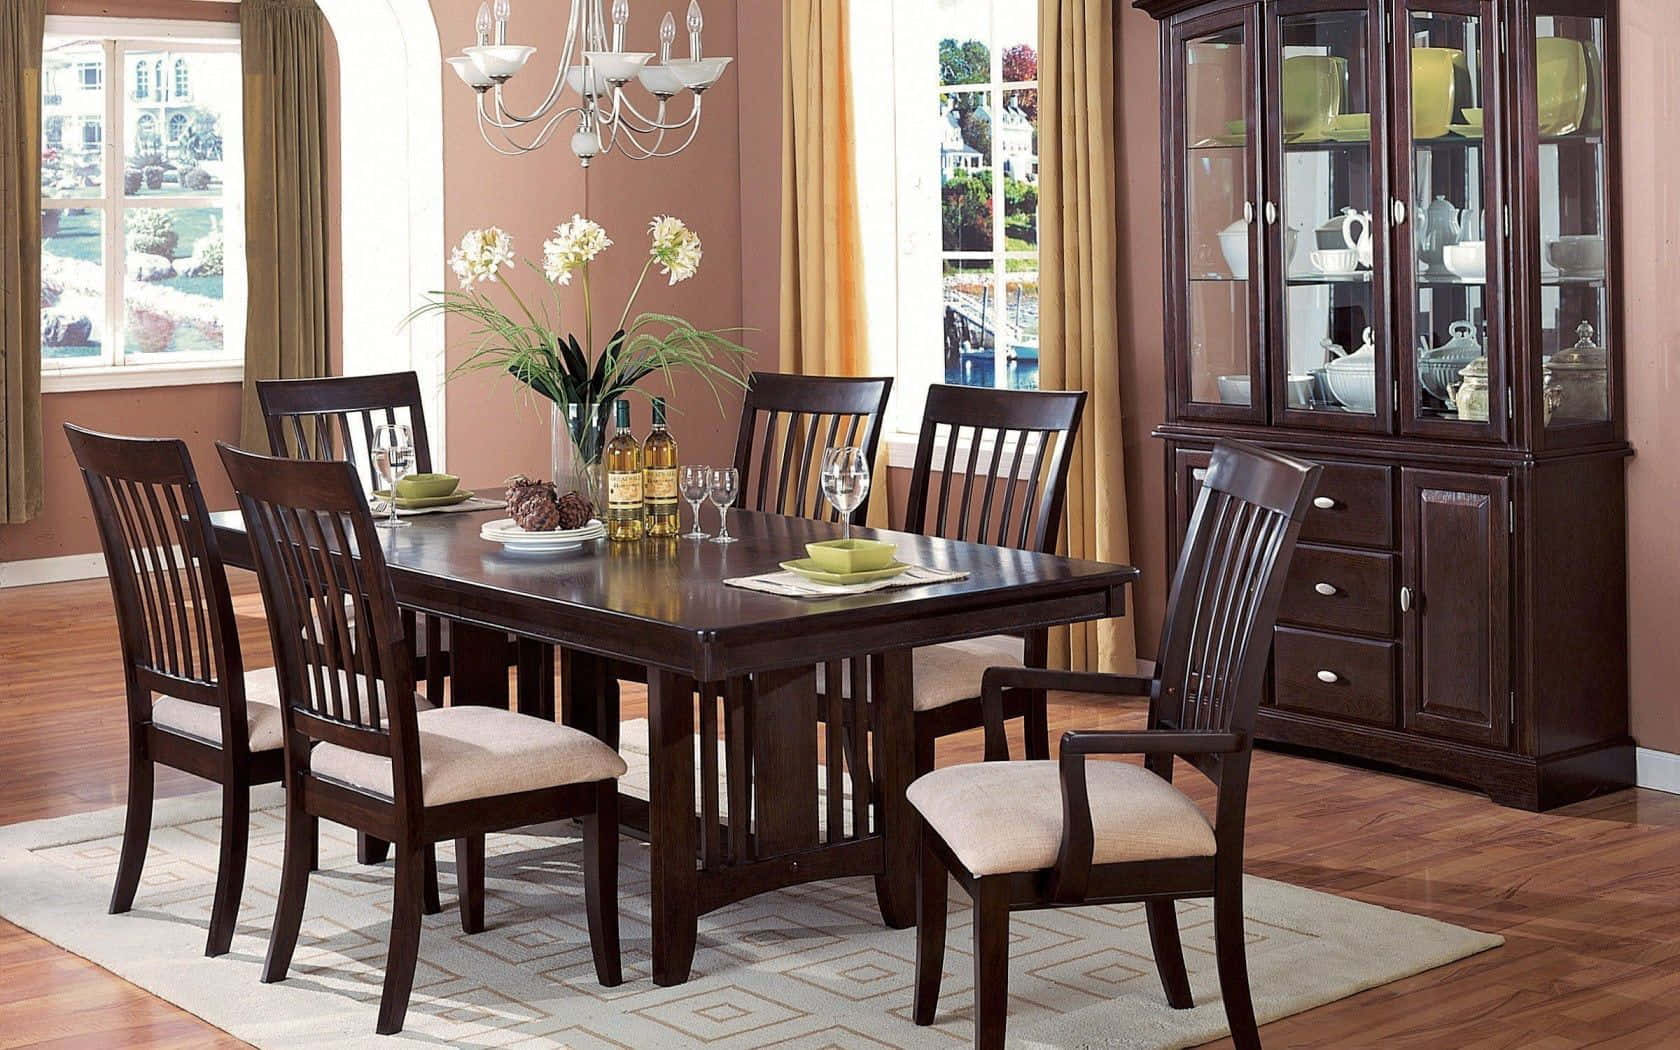 Dining Room With Wooden Table And Chairs Picture